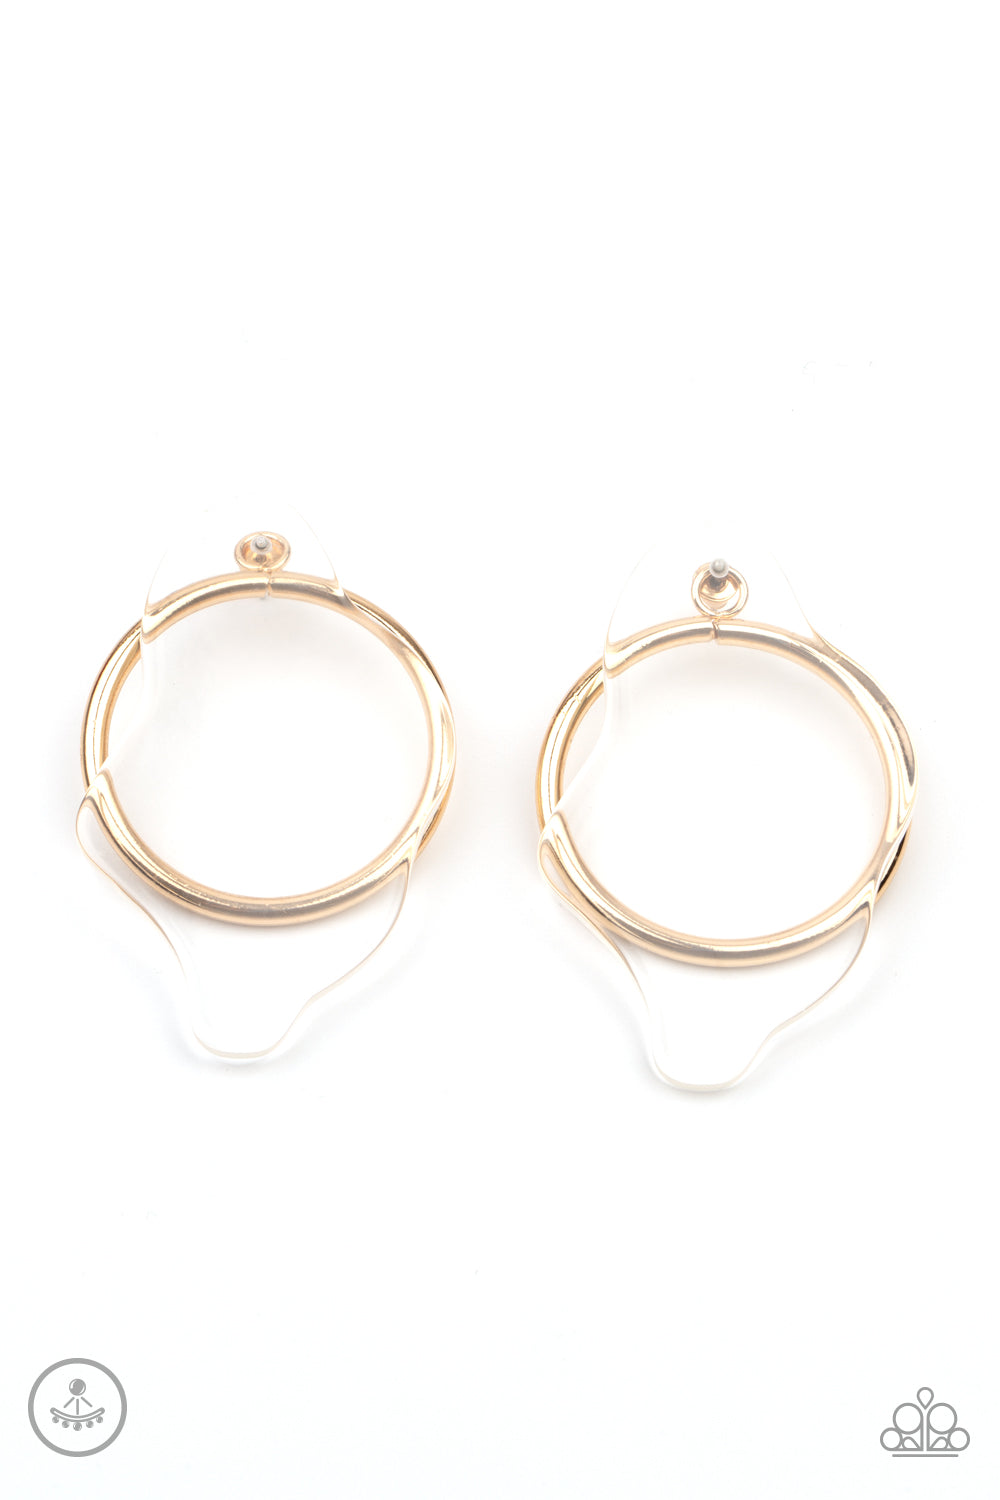 Clear The Way! - Gold post earrings